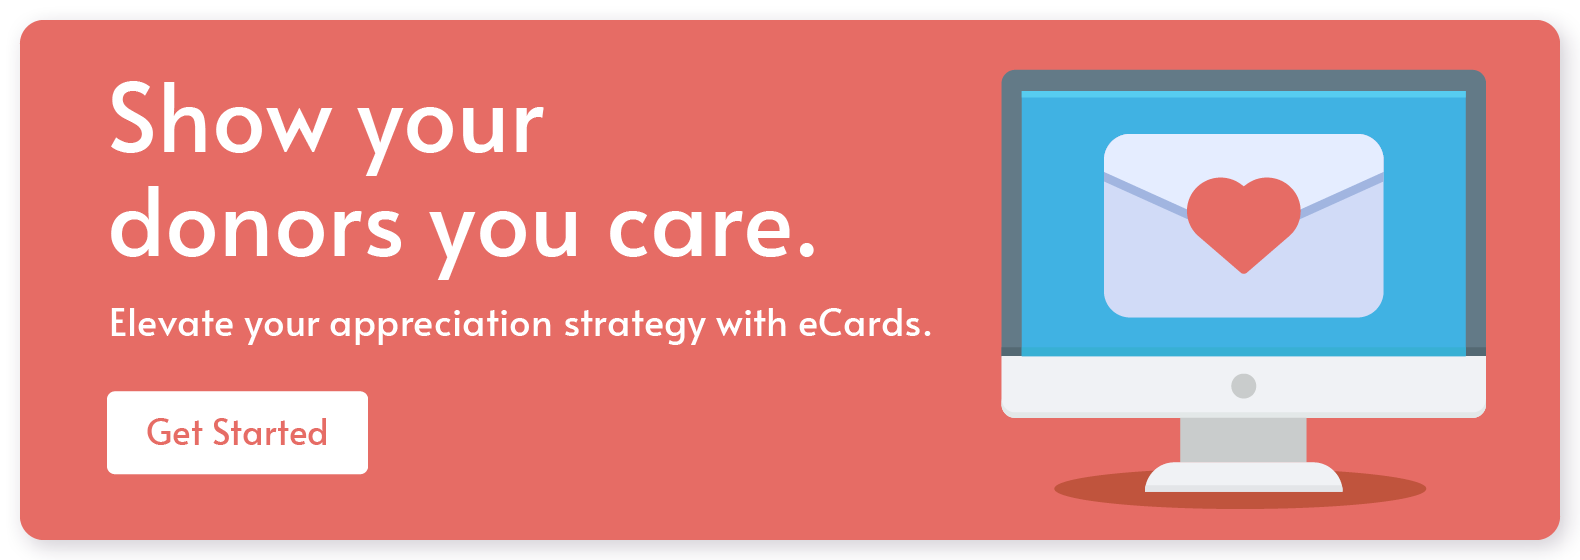 Show your donors you care. Elevate your appreciation strategy with eCards. Get started. 